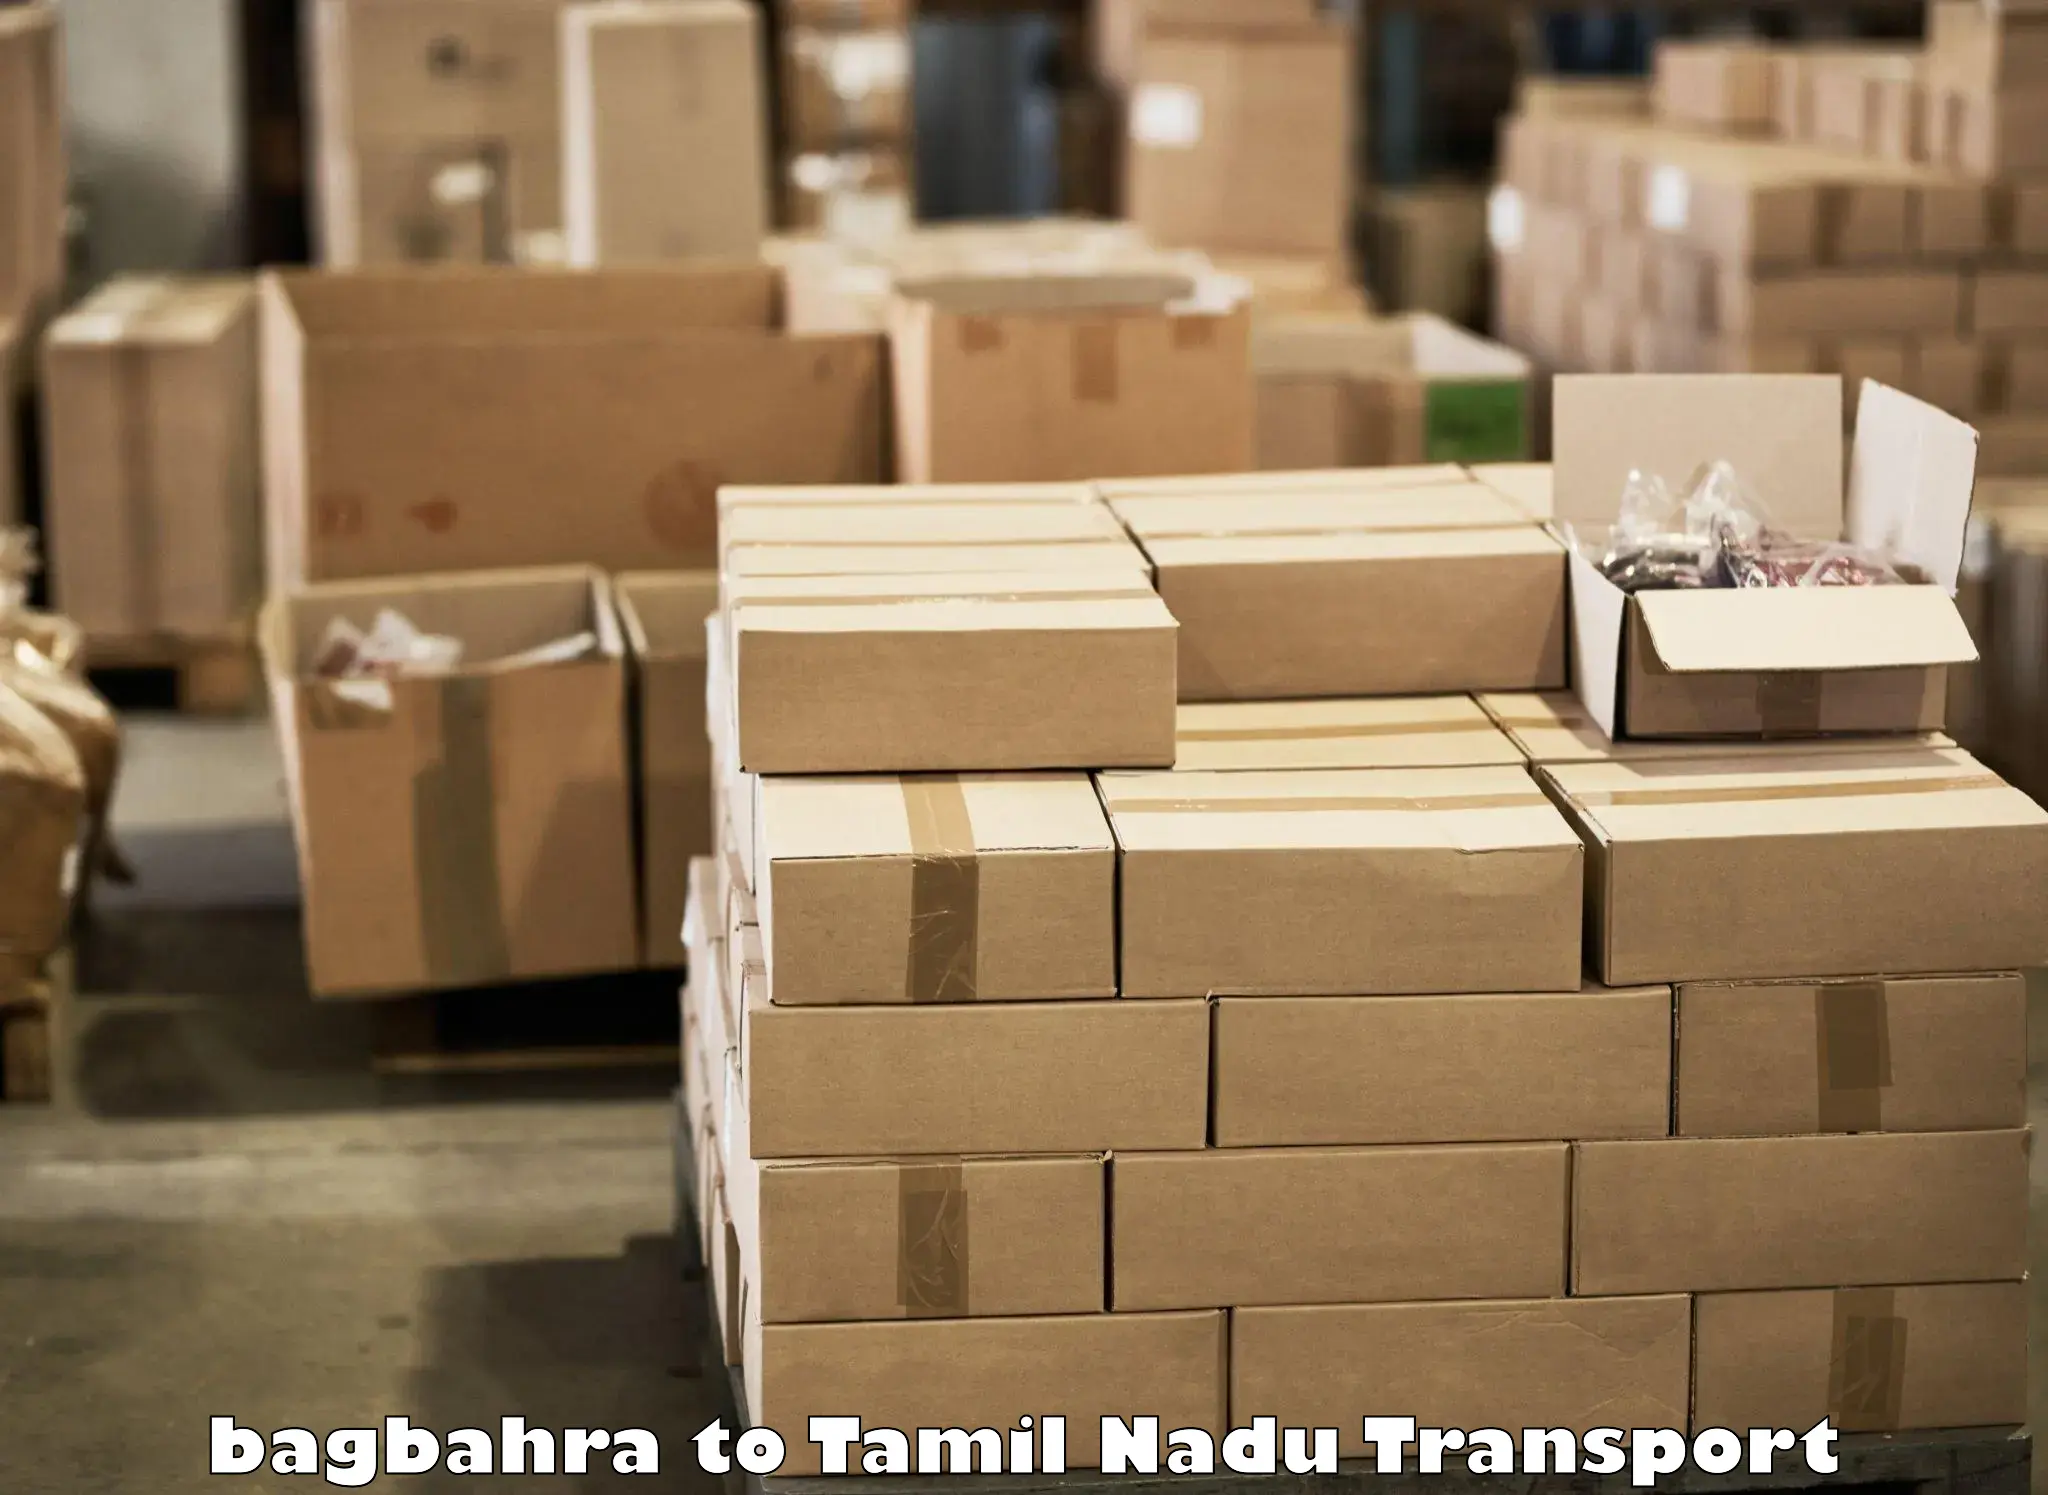 Road transport online services bagbahra to Shanmugha Arts Science Technology and Research Academy Thanjavur